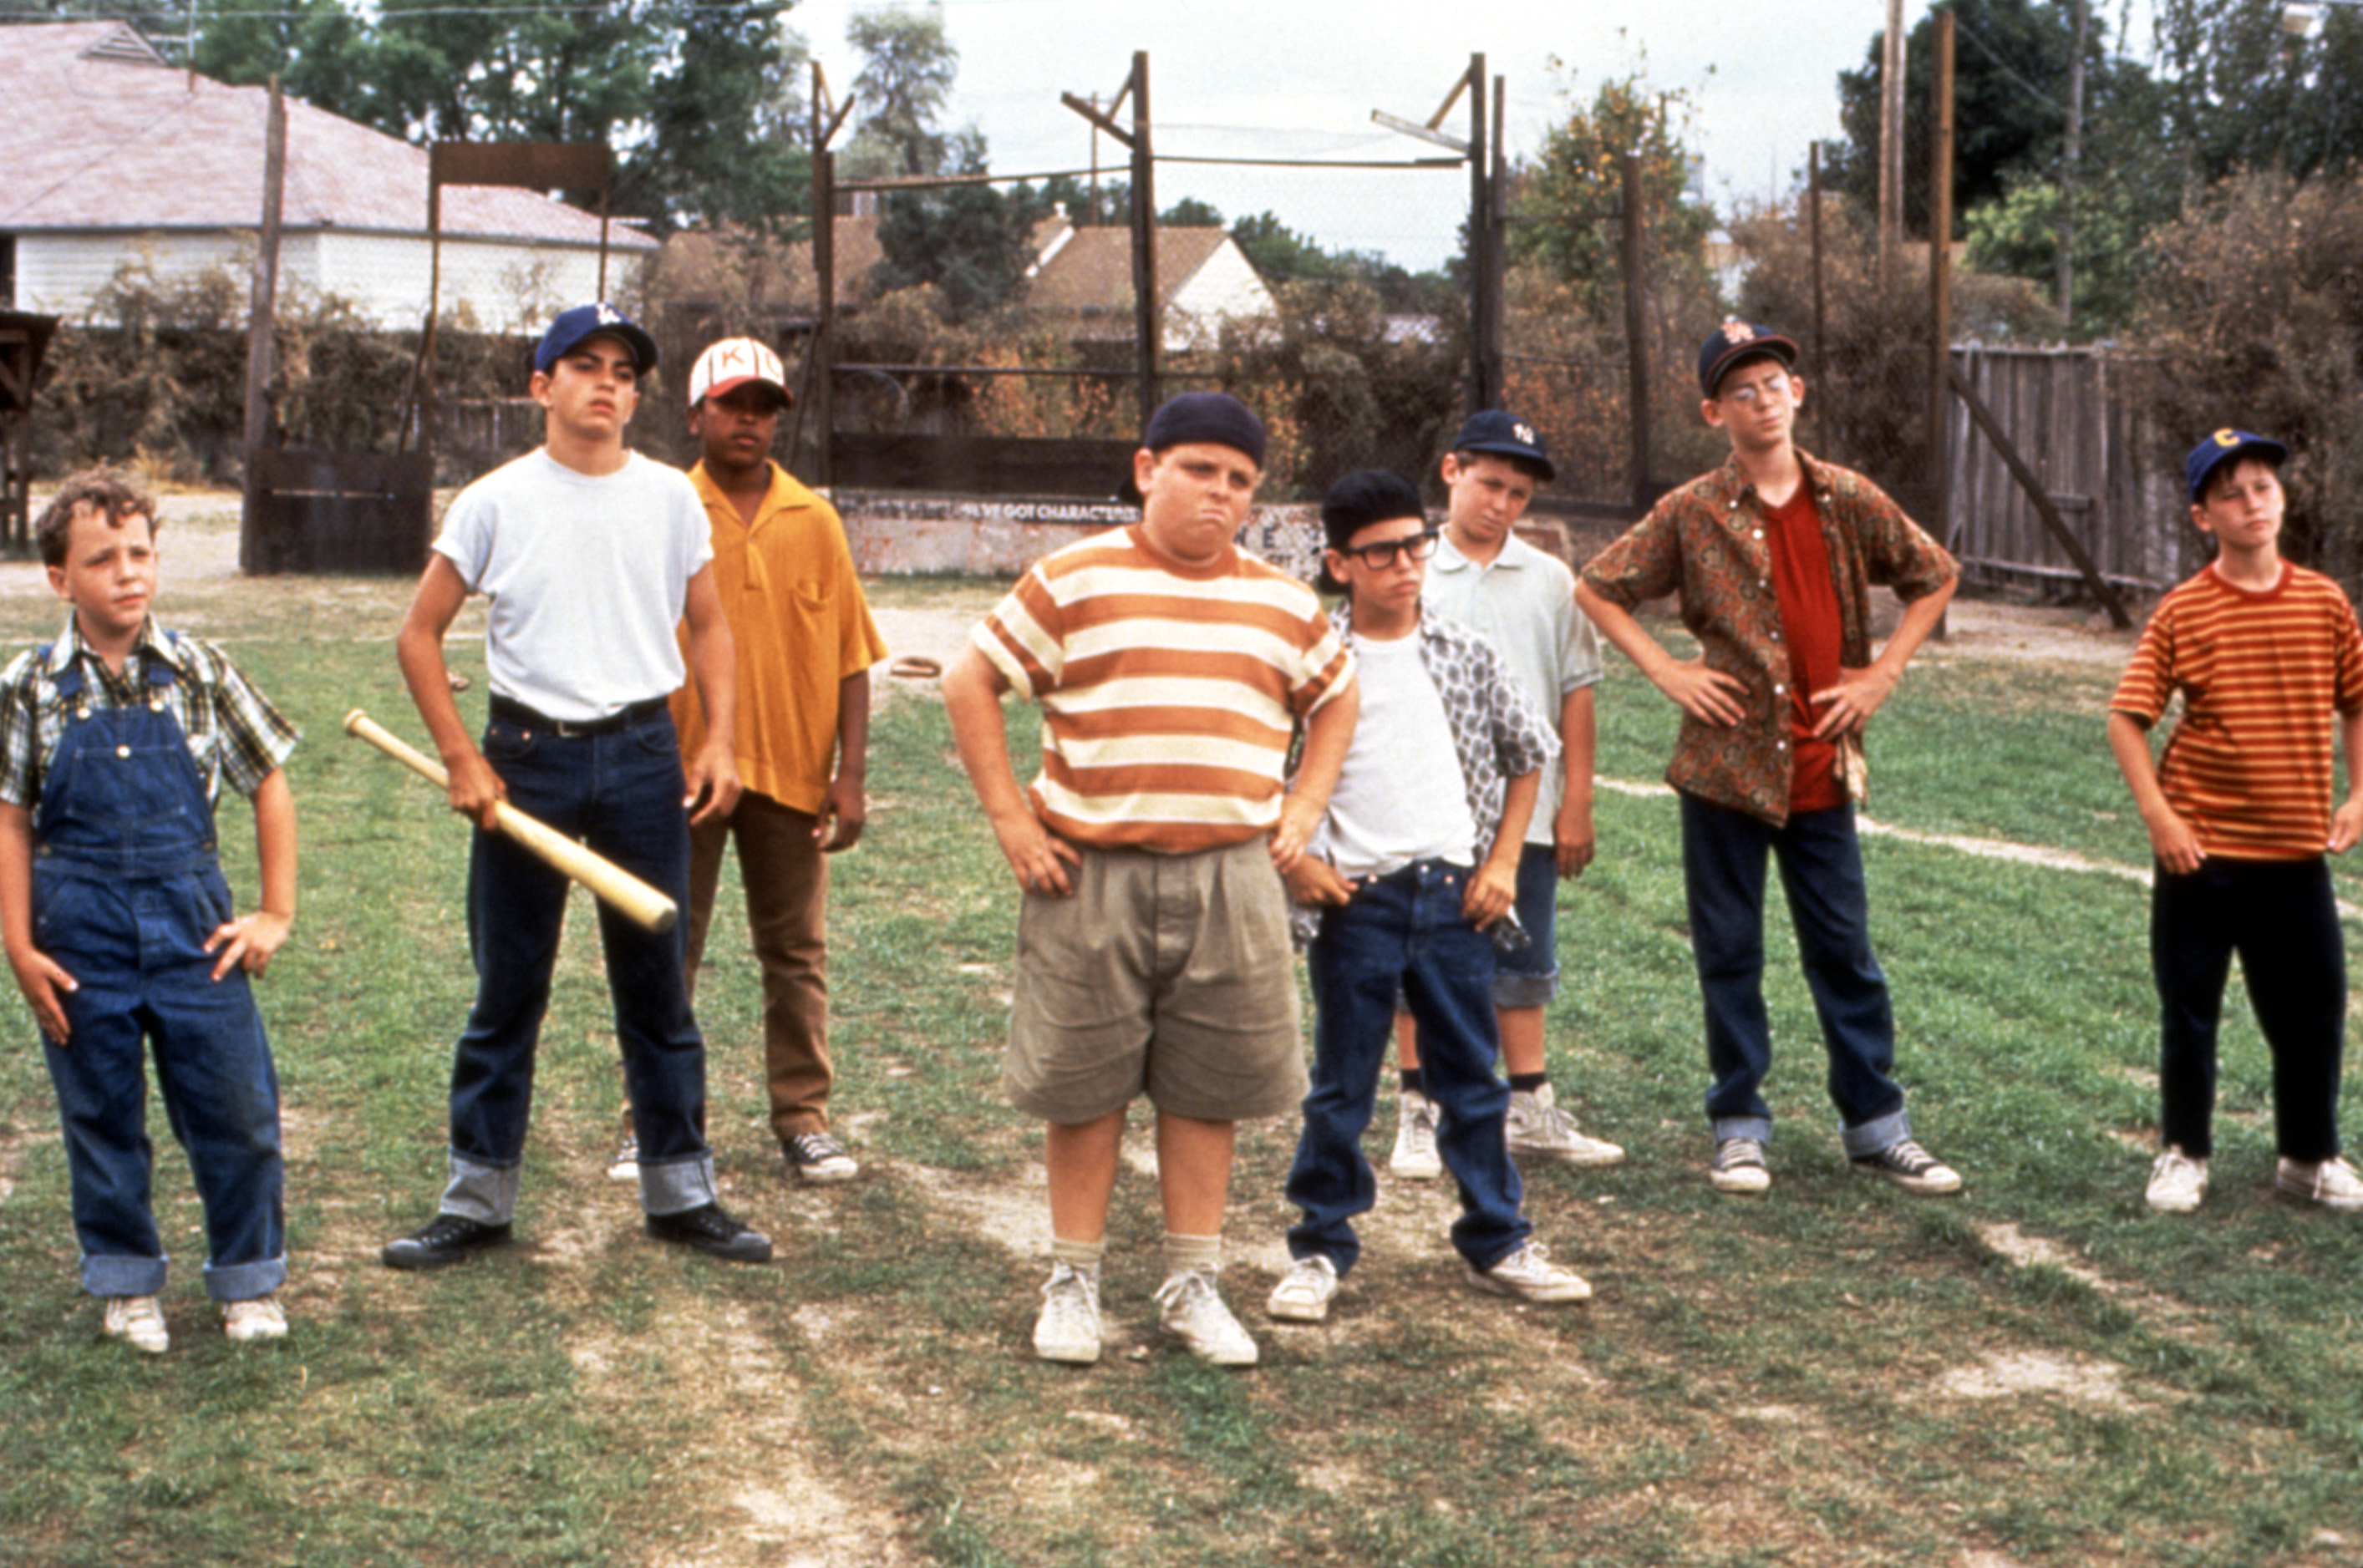 Group of children on a baseball field from &quot;The Sandlot&quot; movie, 1993